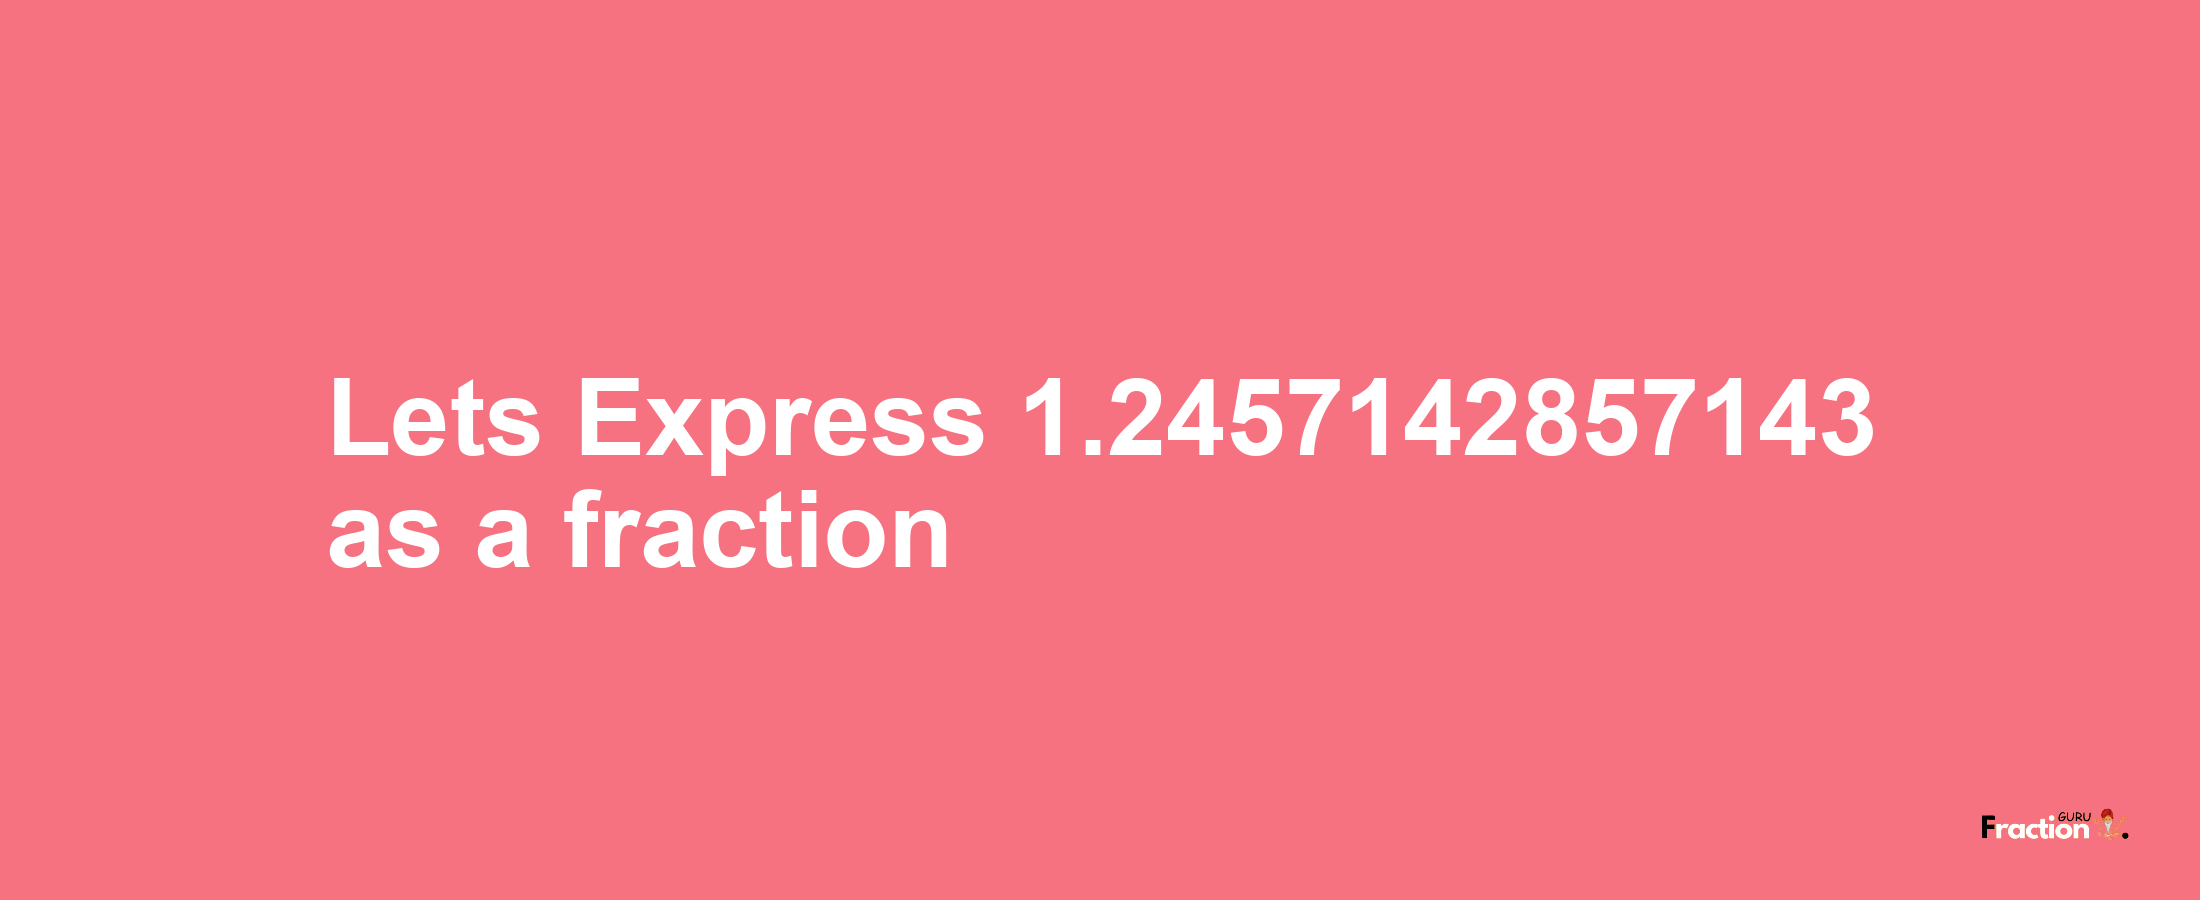 Lets Express 1.2457142857143 as afraction